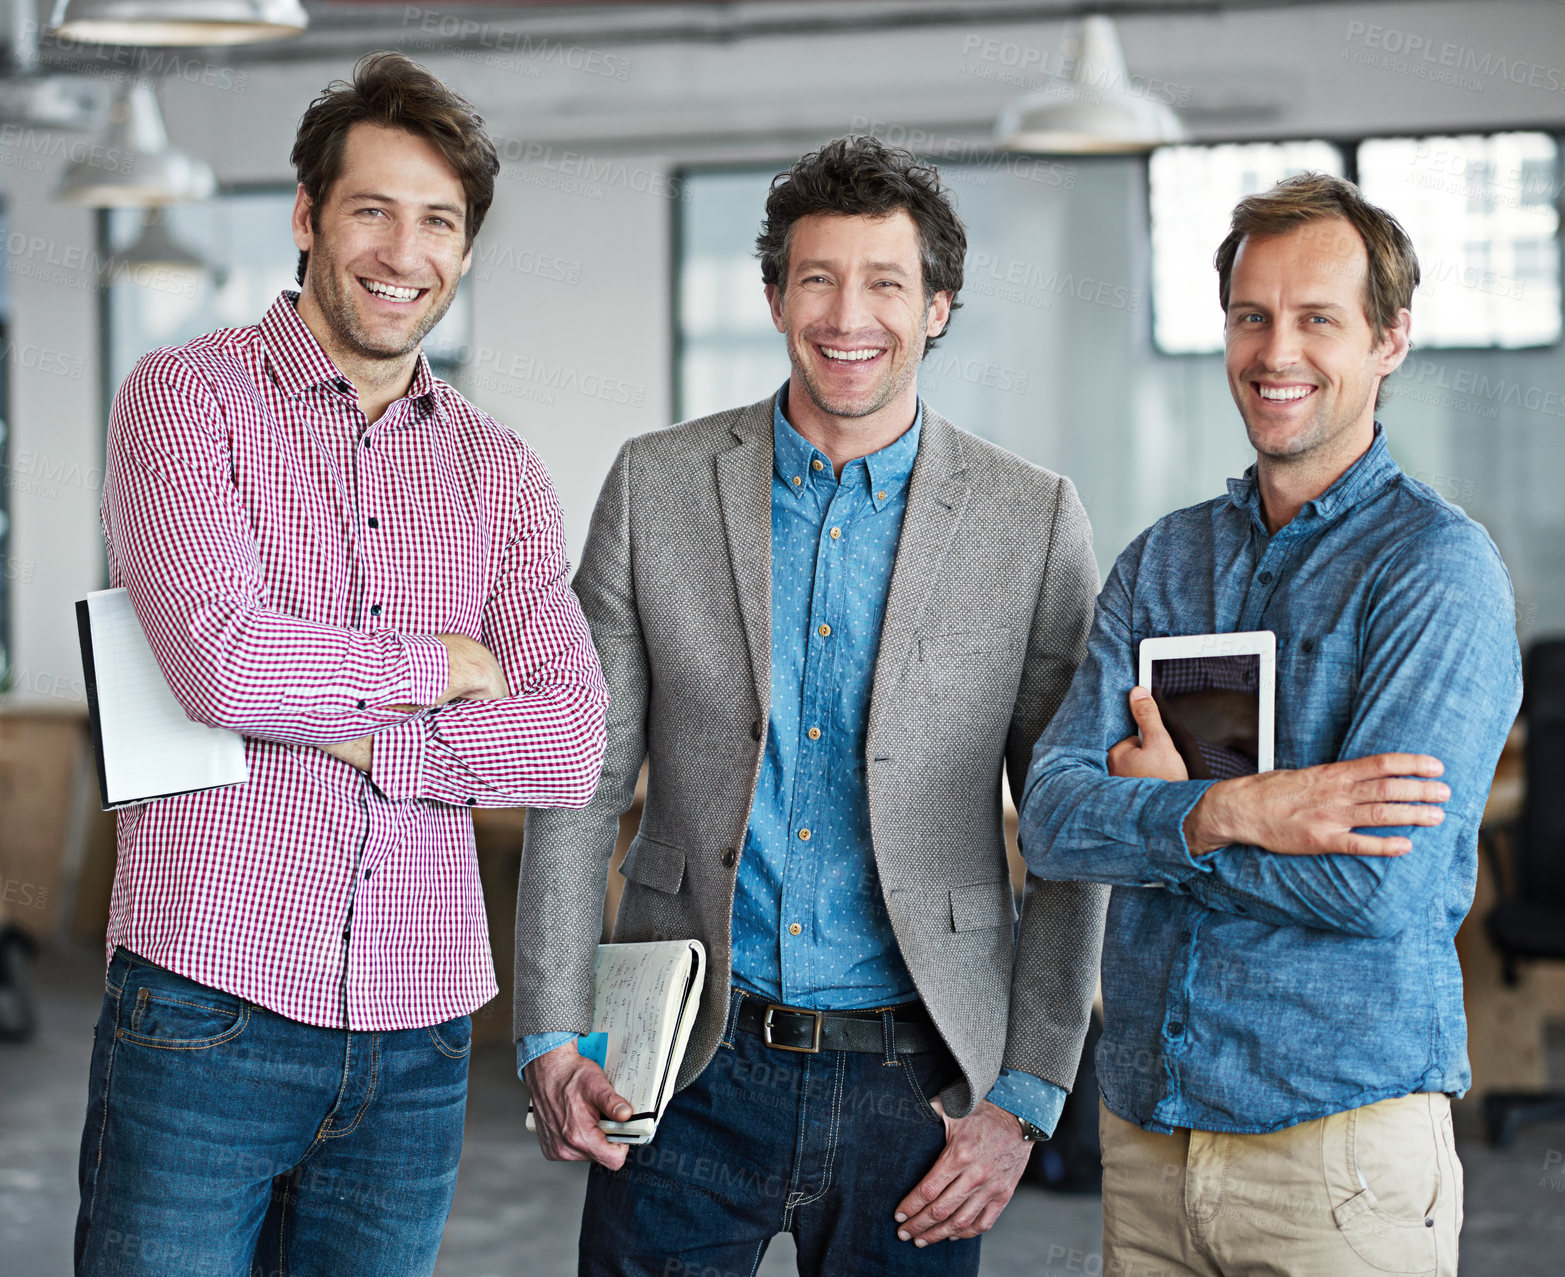 Buy stock photo Smiling, happy and confident business men standing together in an office. Portrait of a male architect group with a smile ready to work. Architecture workers feeling positive about a teamwork project